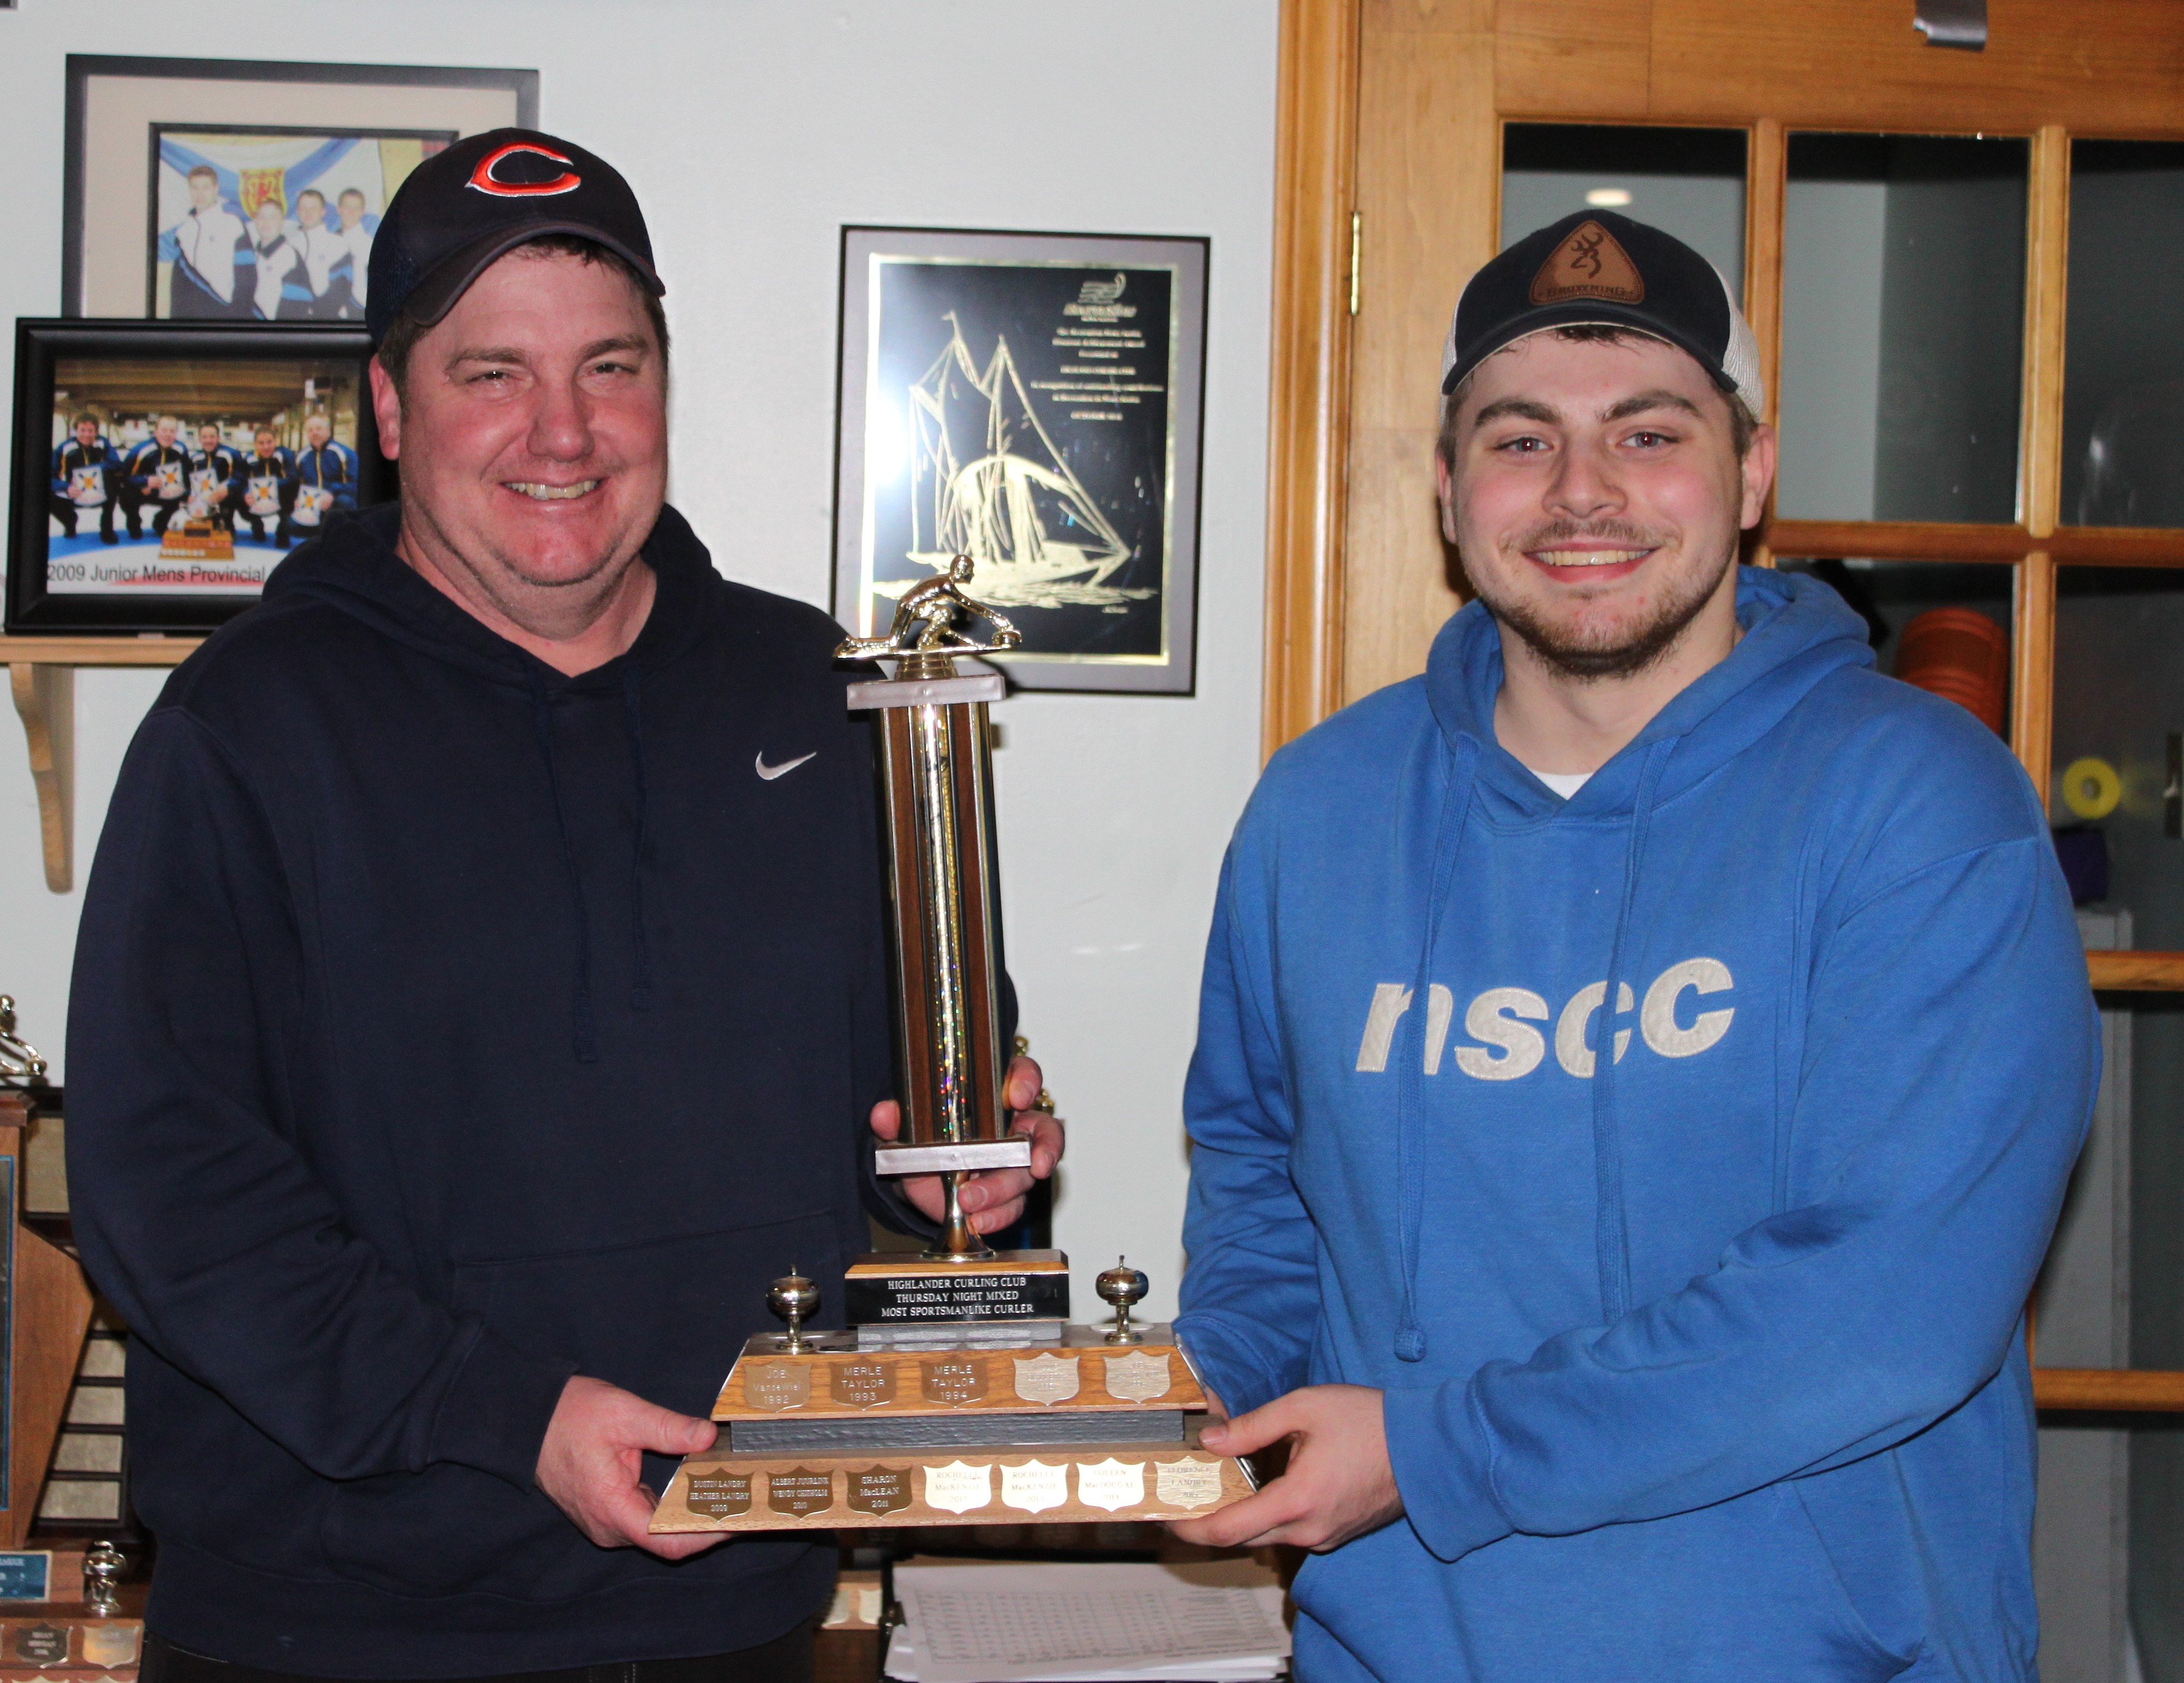 Thursday Night Most Sportsmanlike: Eric Lumsden
Presented by last year's winner Nathaniel Smith